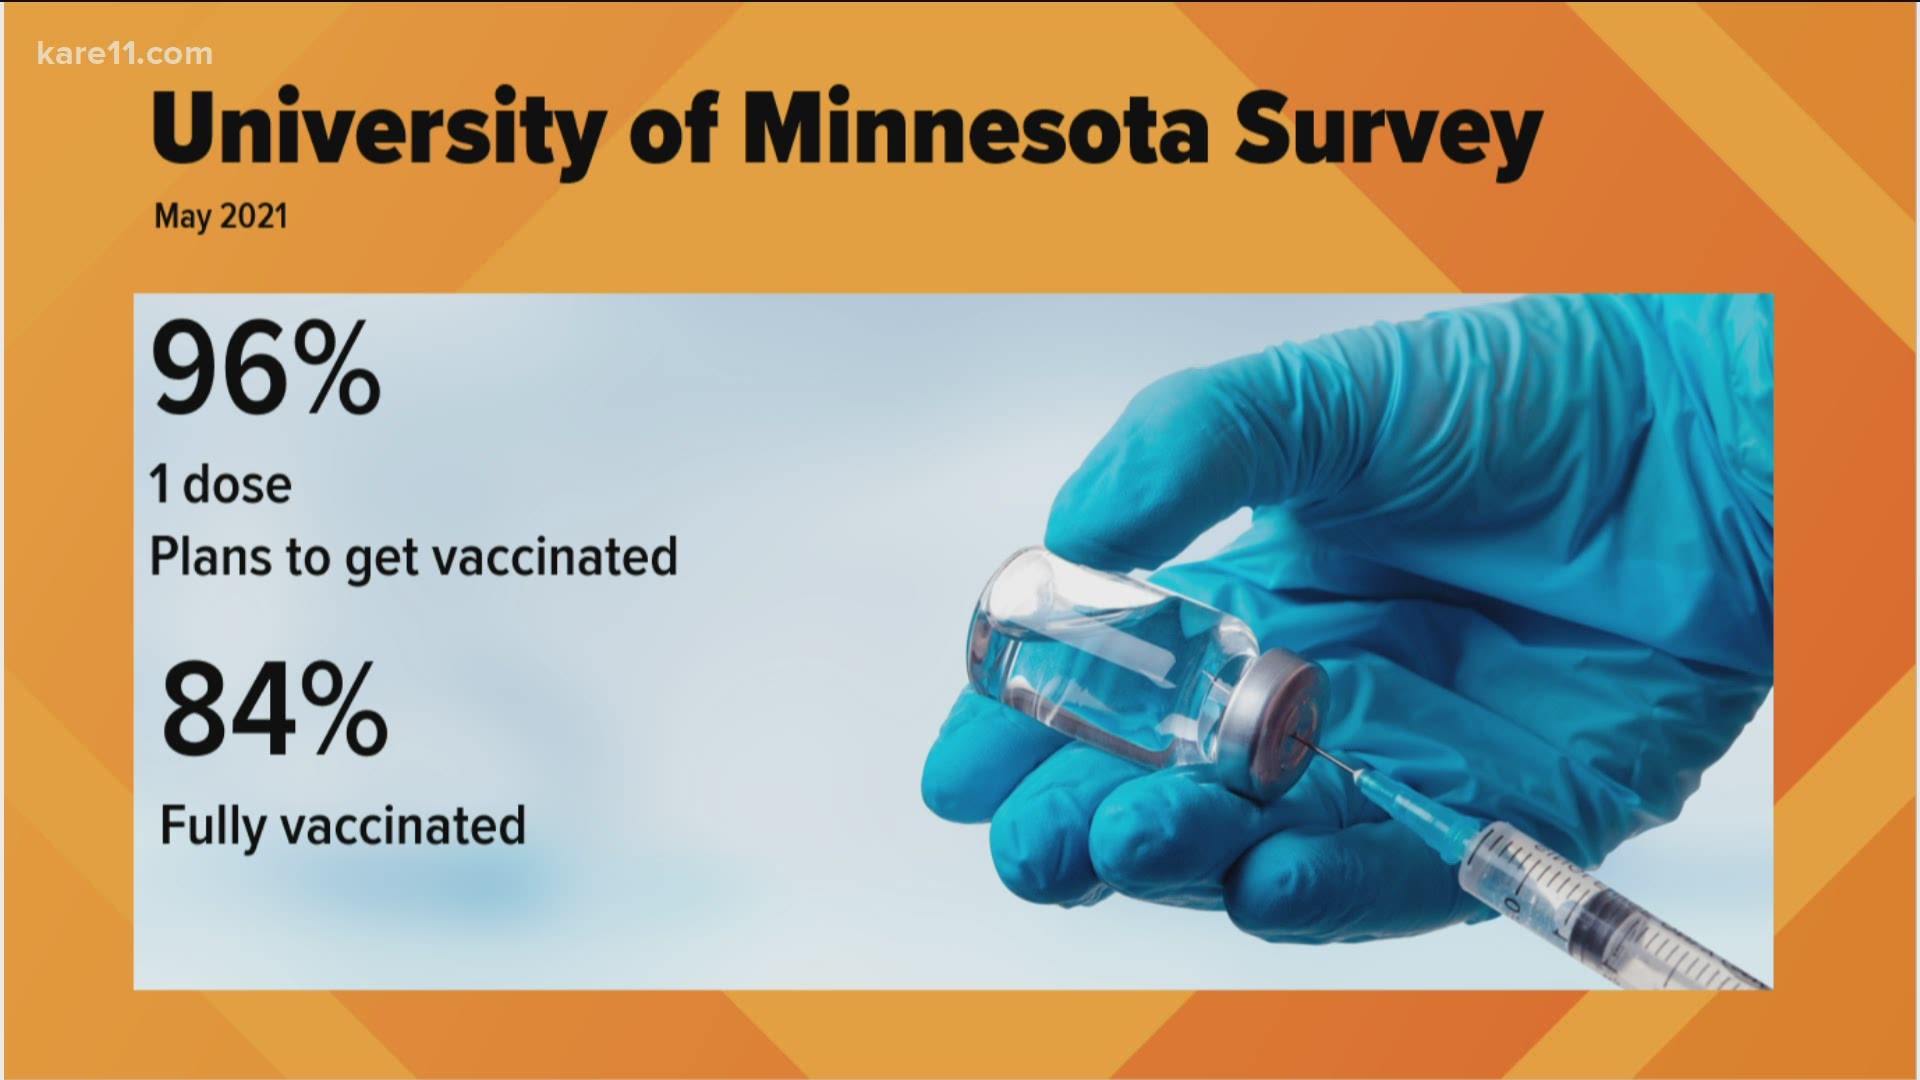 A survey from the university shows among students, staff and faculty found 96% of respondents had received at least one vaccine dose, or has plans to be vaccinated.